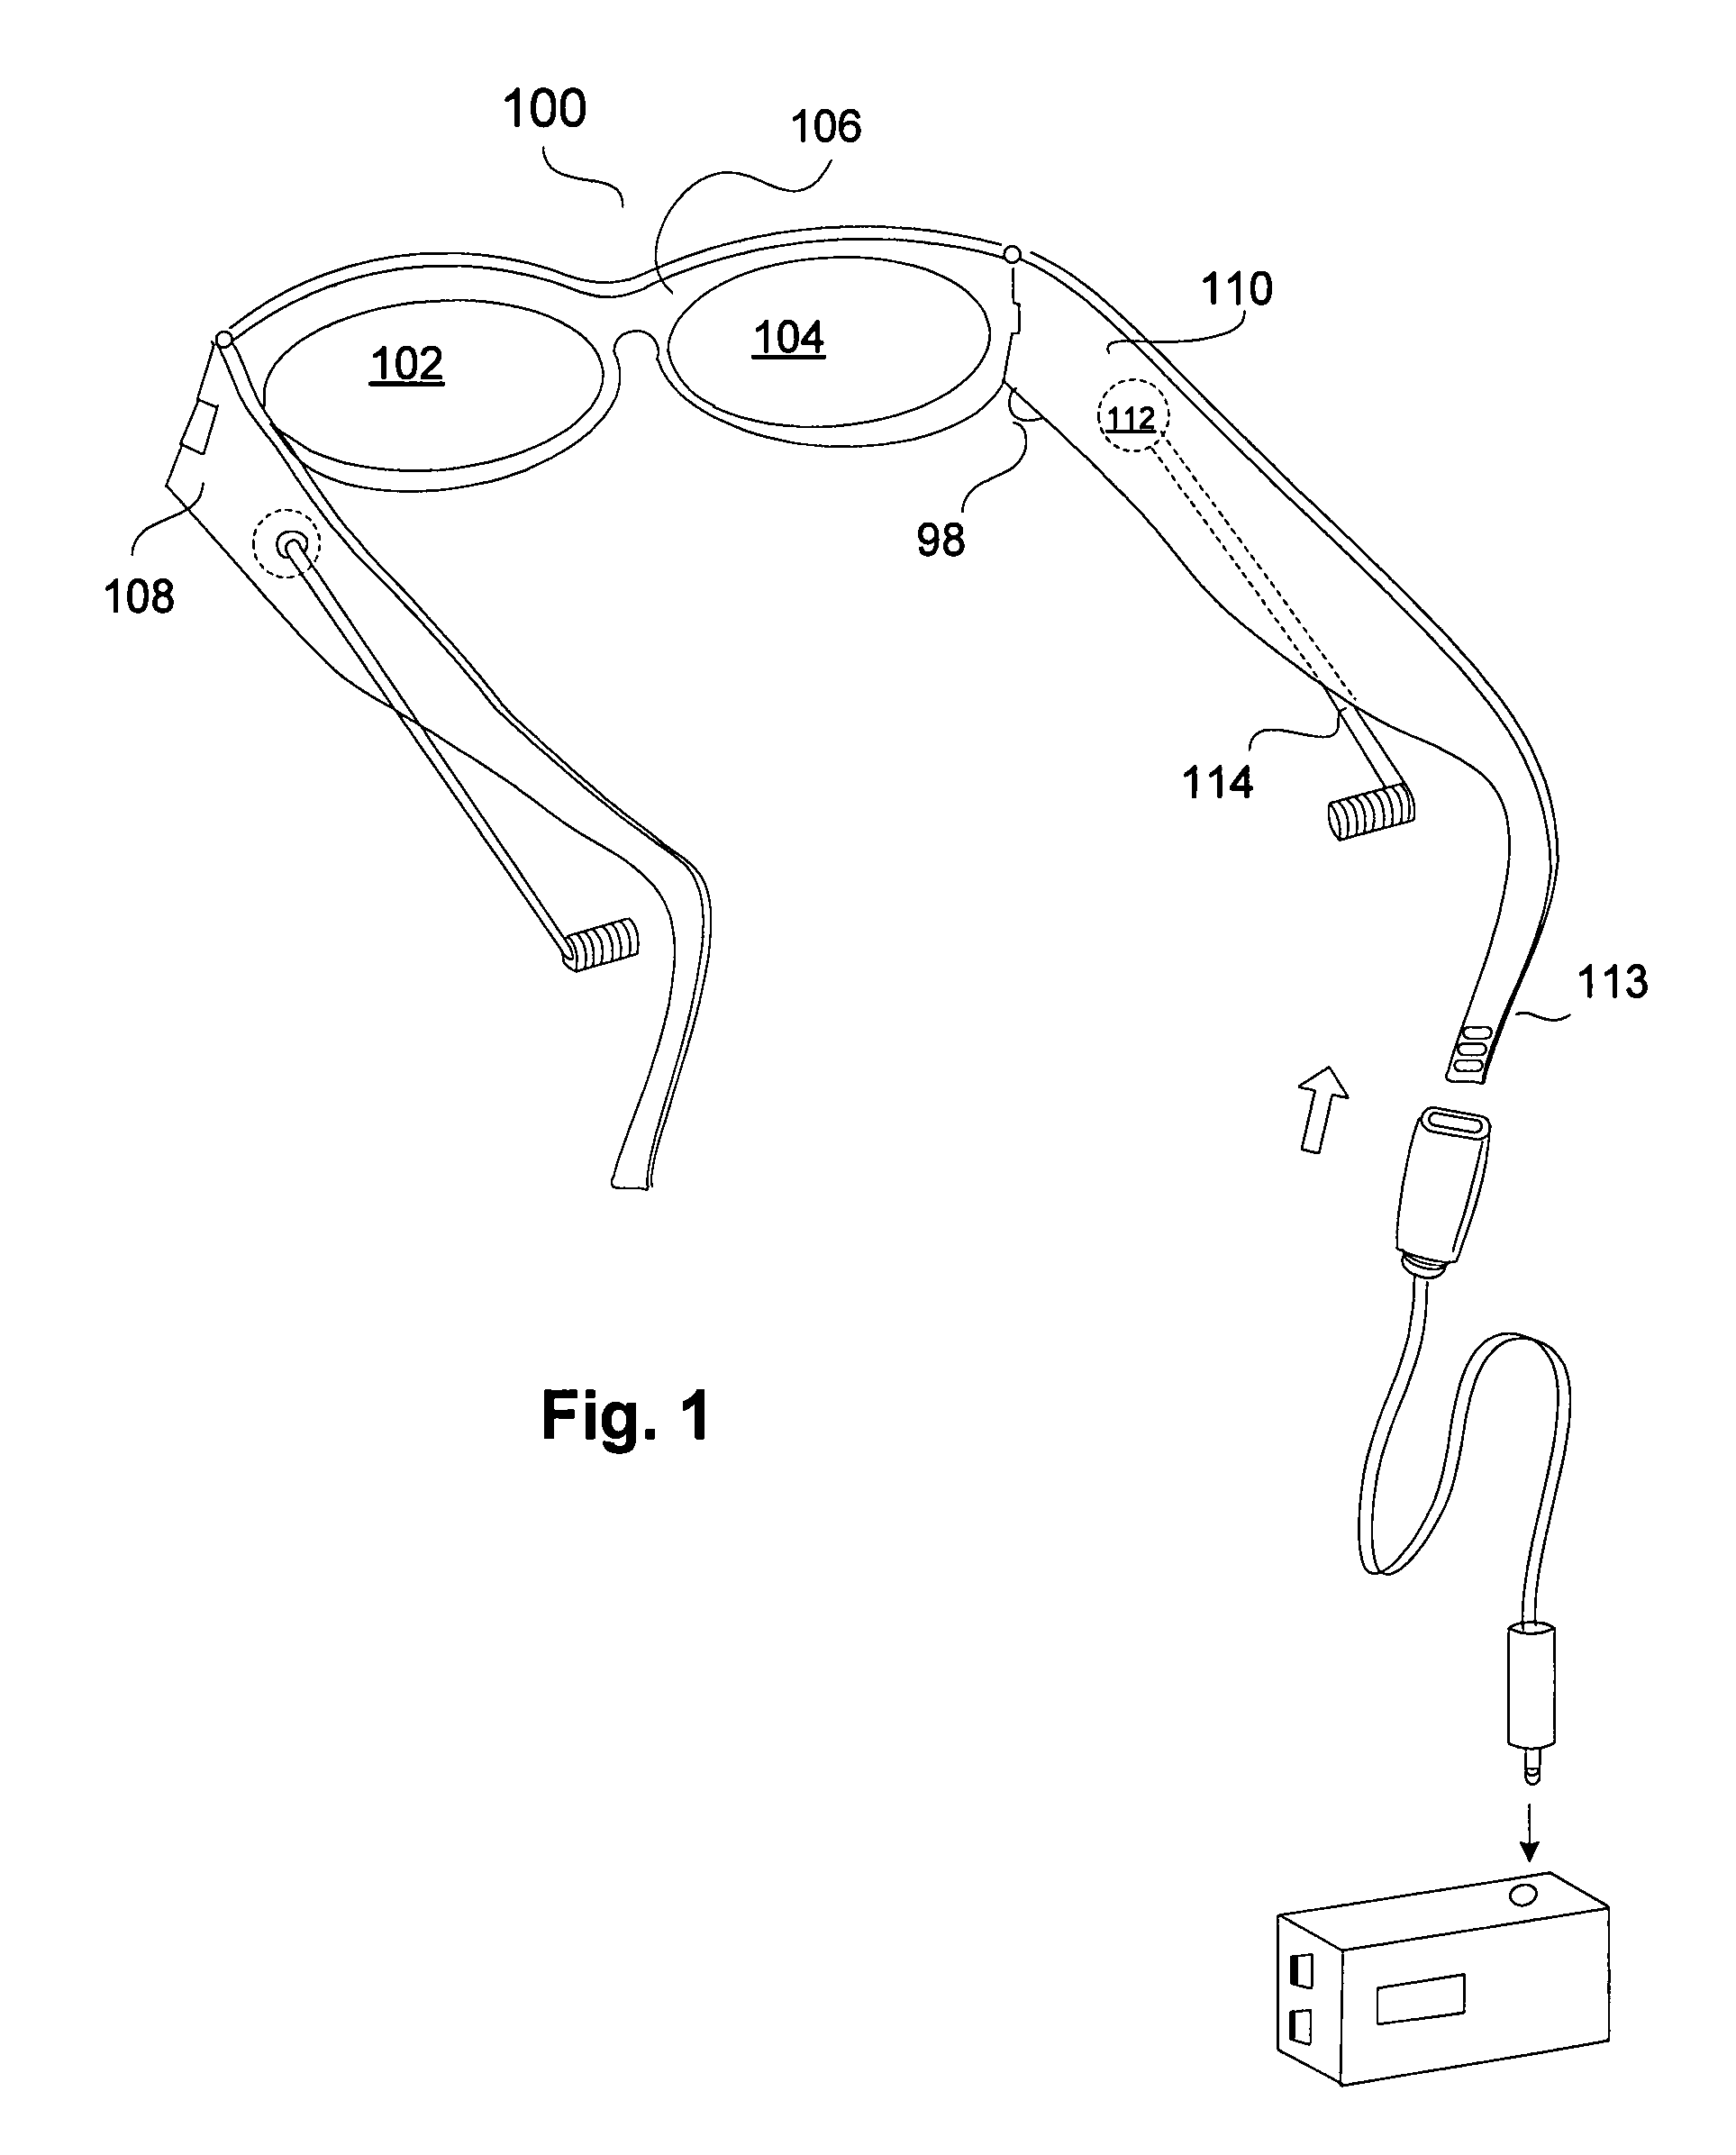 Eyeglasses with hearing enhanced and other audio signal-generating capabilities